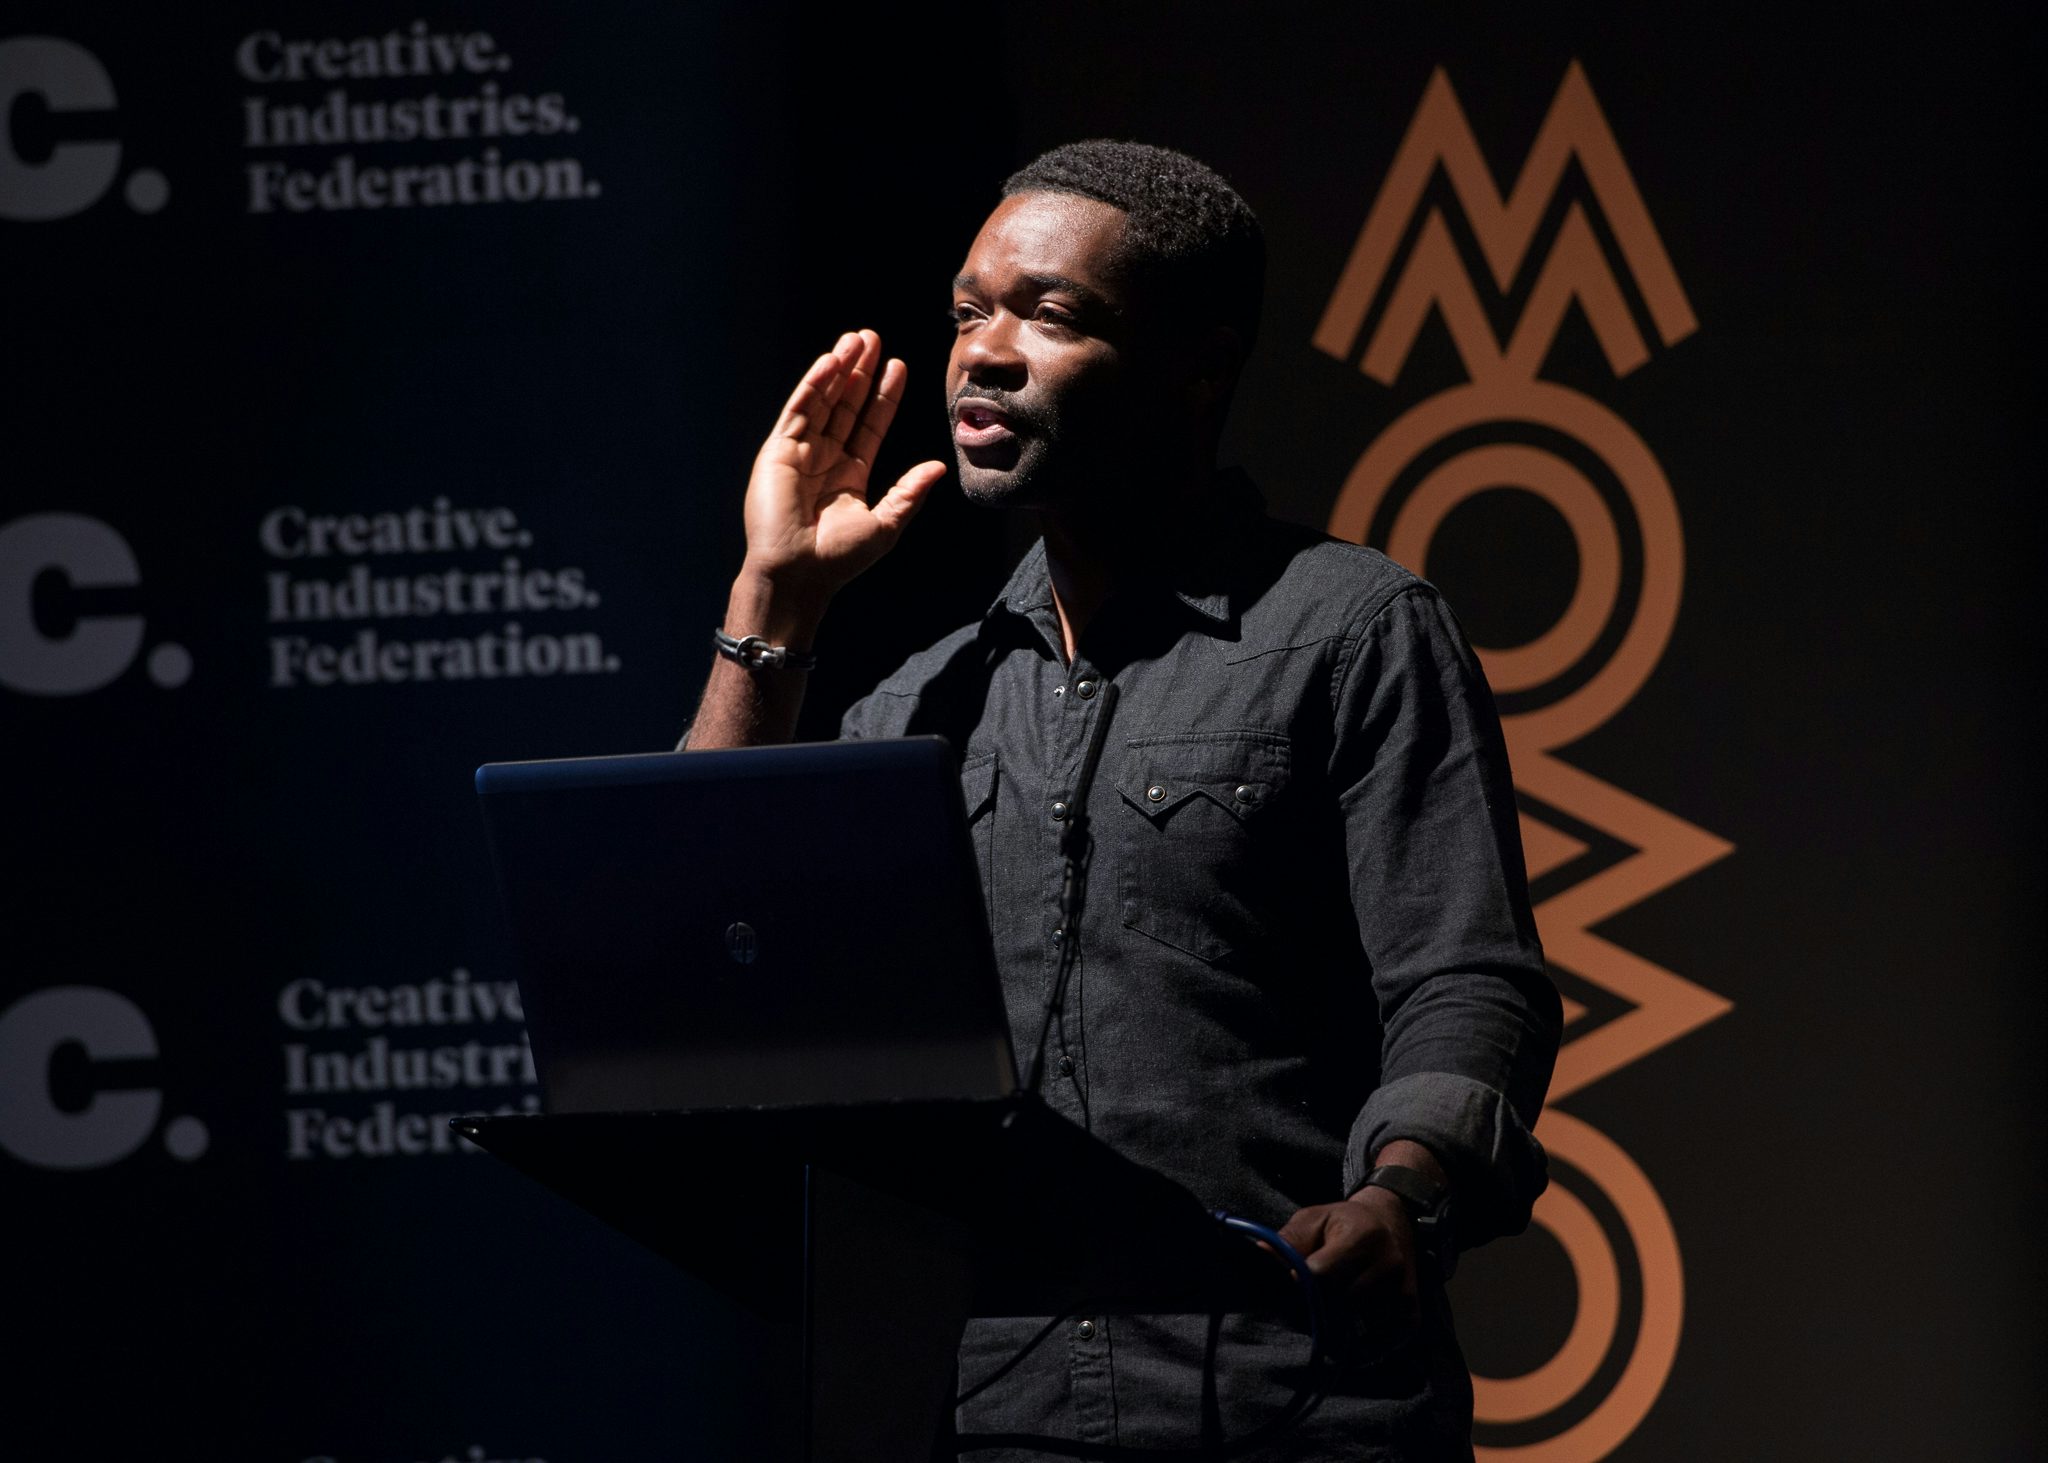 Actor David Oyelowo speaks at MOBO and CIF's event on diversity in the creative industries